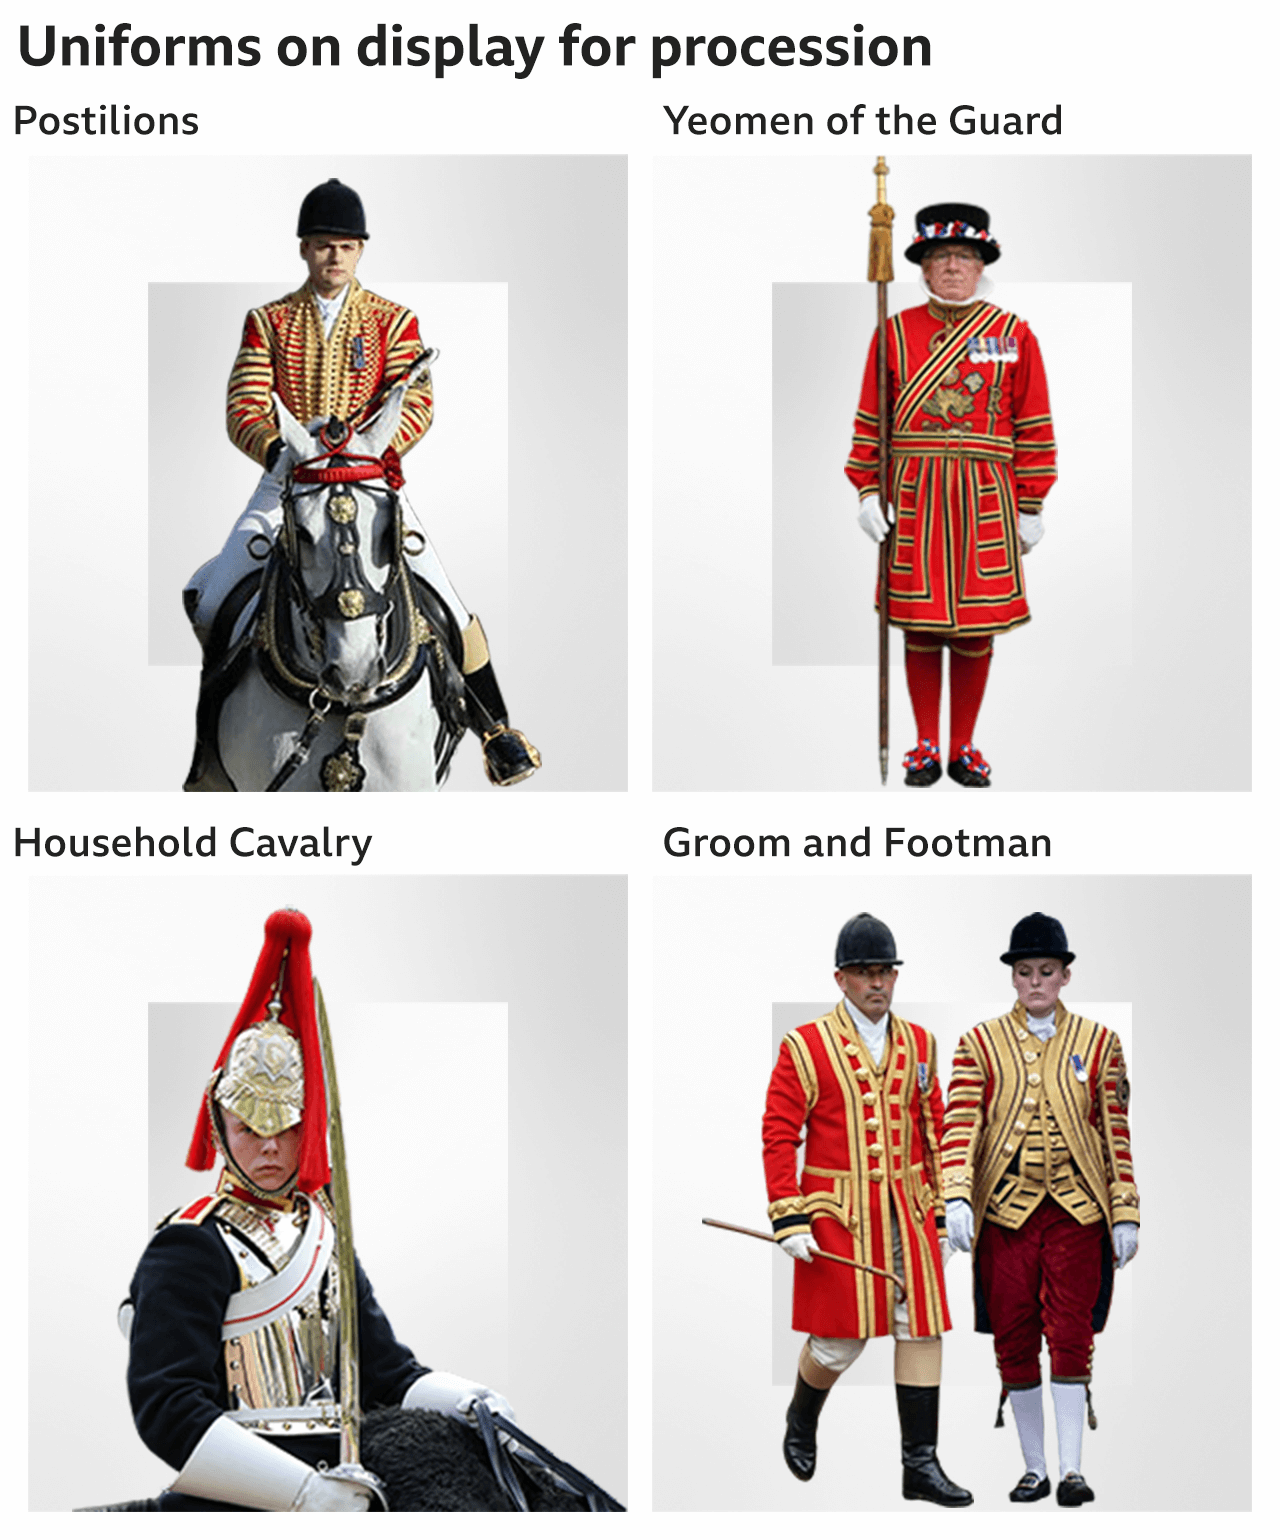 Graphic showing some of the uniforms likely to be worn for the postilions, Yeoman of the Guard, Household Cavalry and the groom and footman